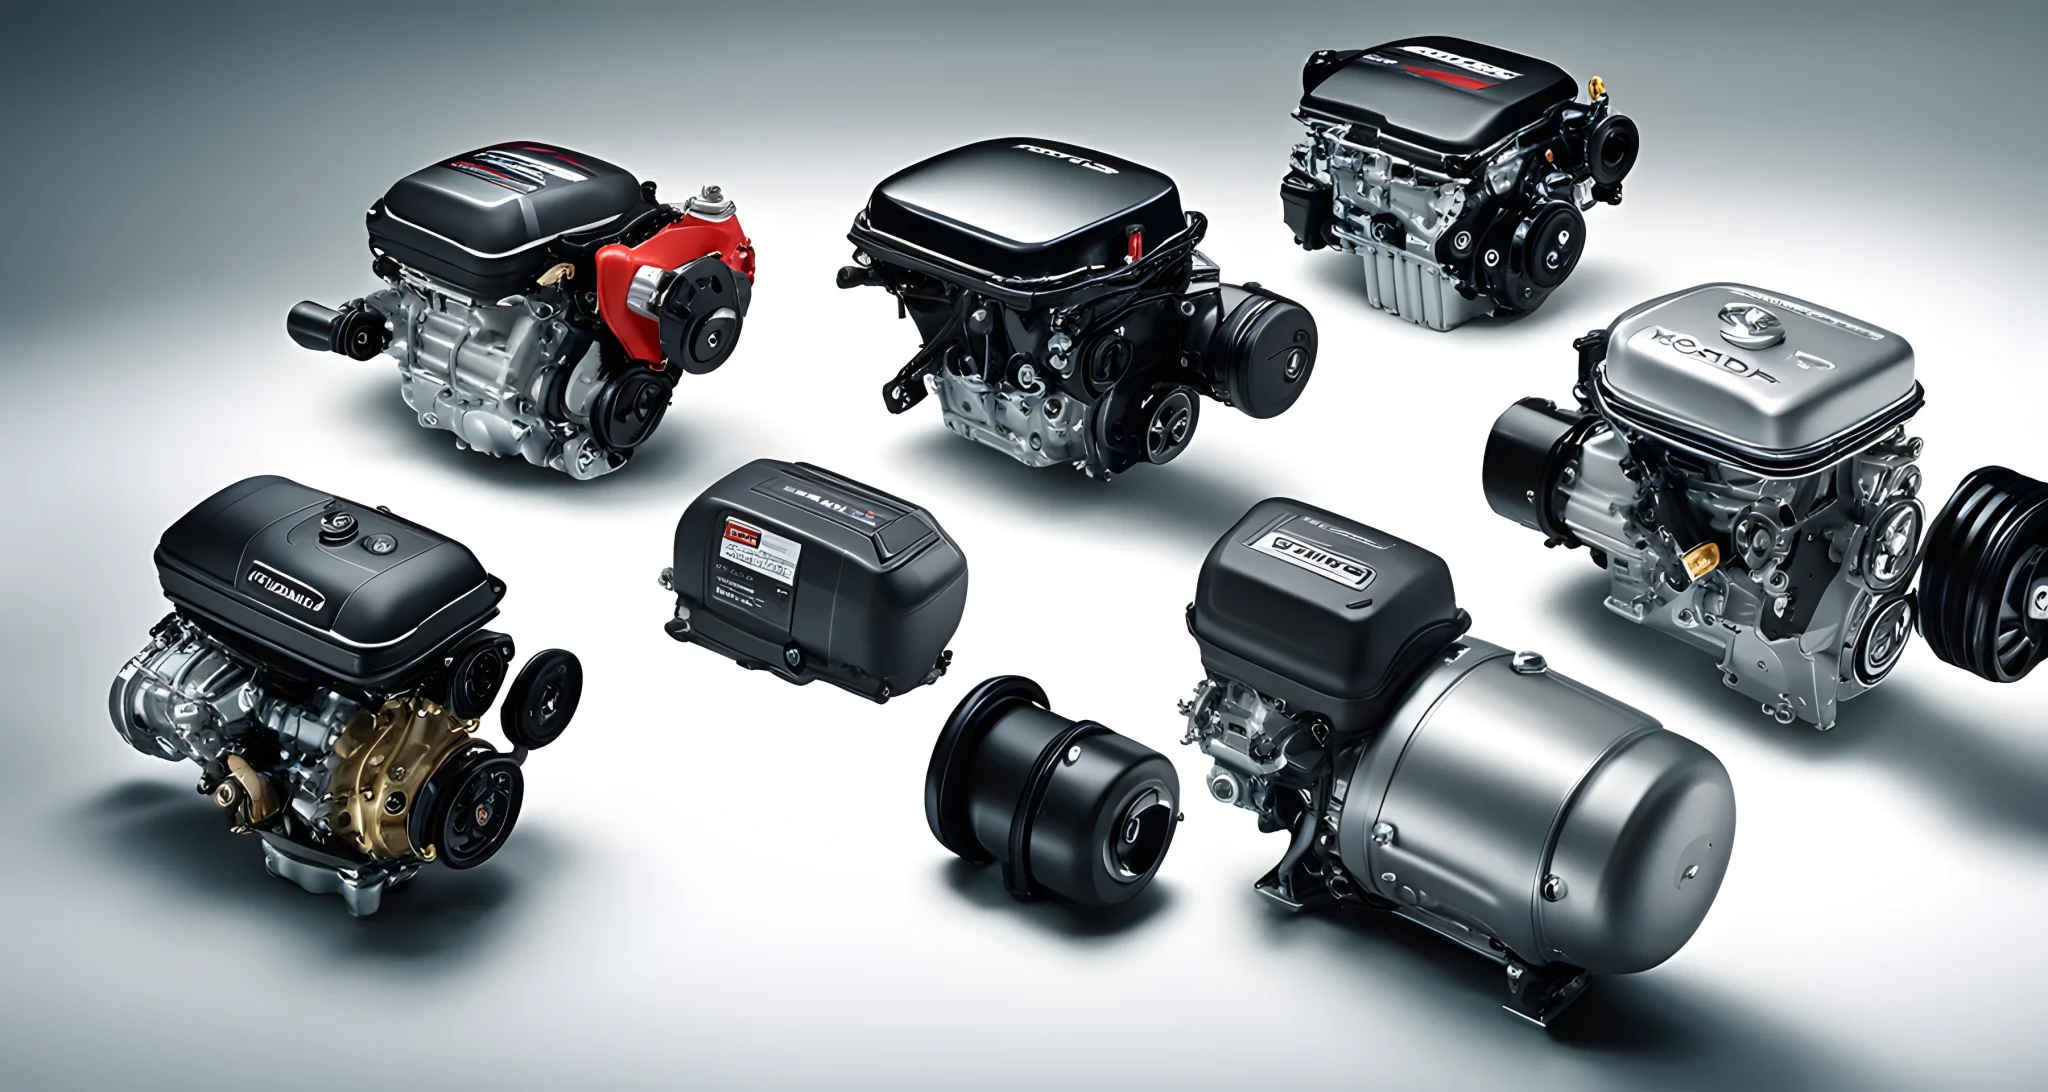 The image shows a variety of Honda car engines and powertrain options, including different types of motor, transmission, and fuel system.